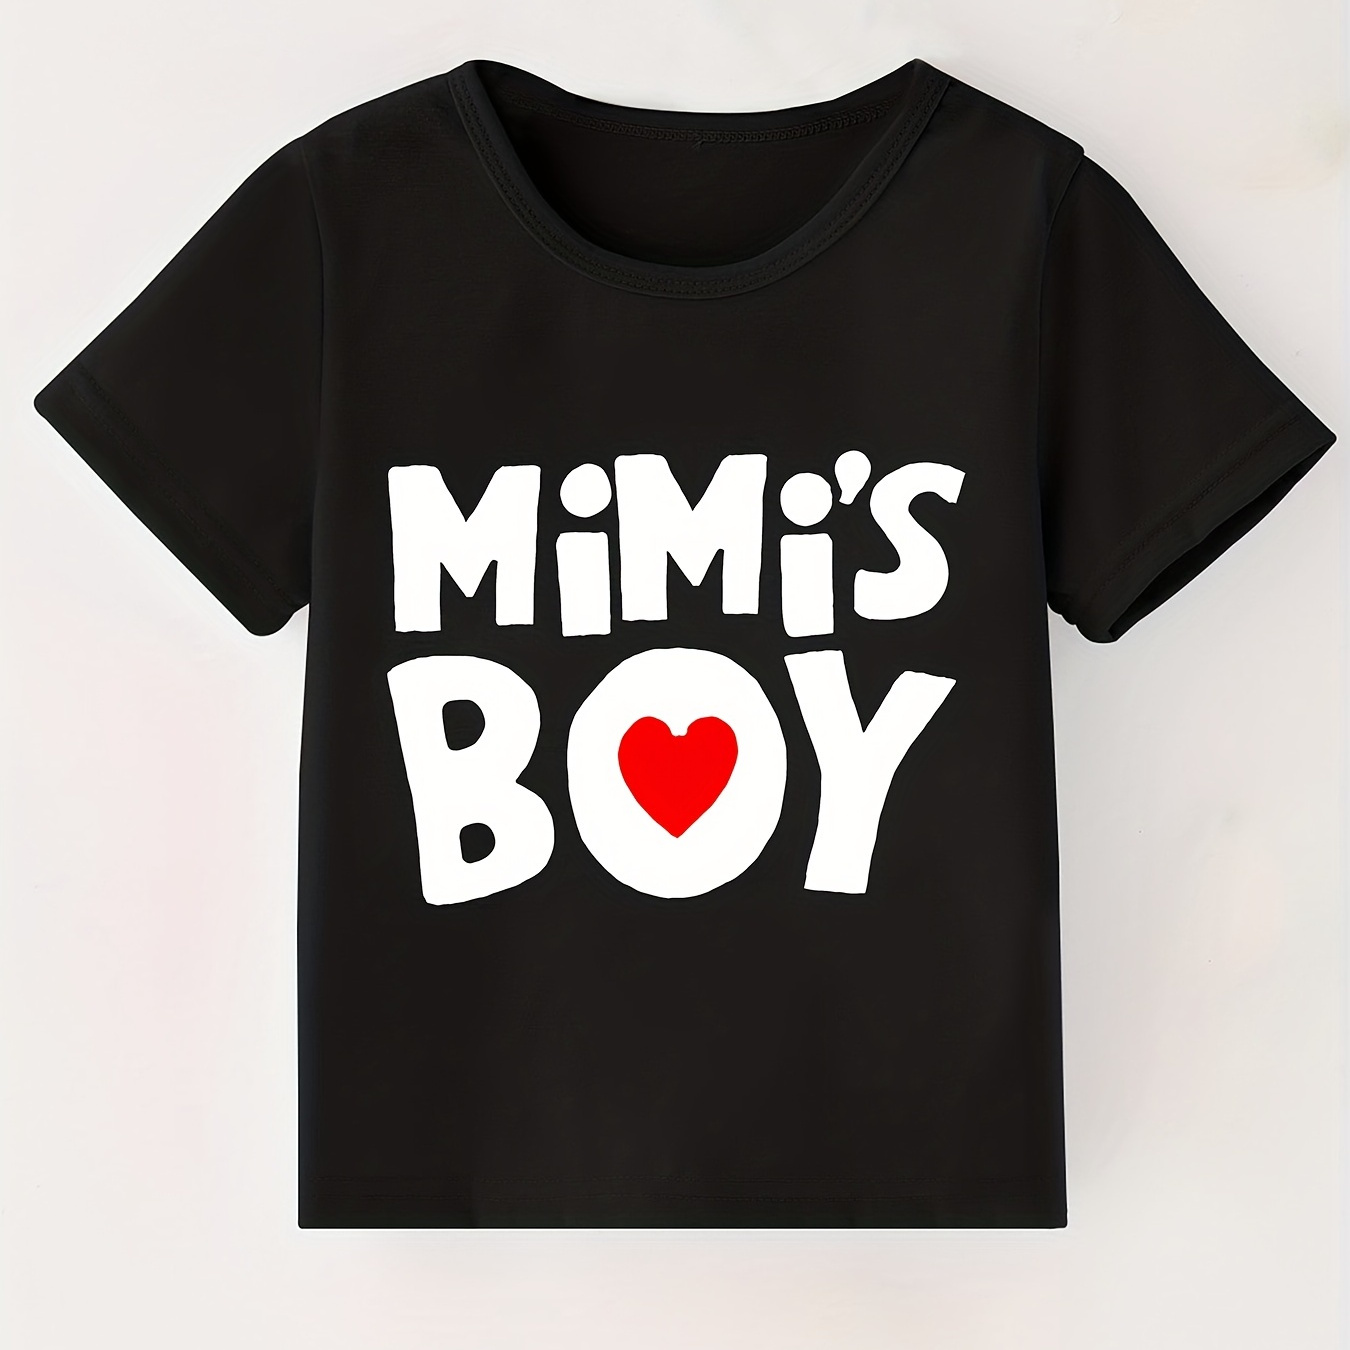 

Mimi's Boy Letter Print Boys Creative T-shirt, Casual Lightweight Comfy Short Sleeve Tee Tops, Kids Clothes For Summer